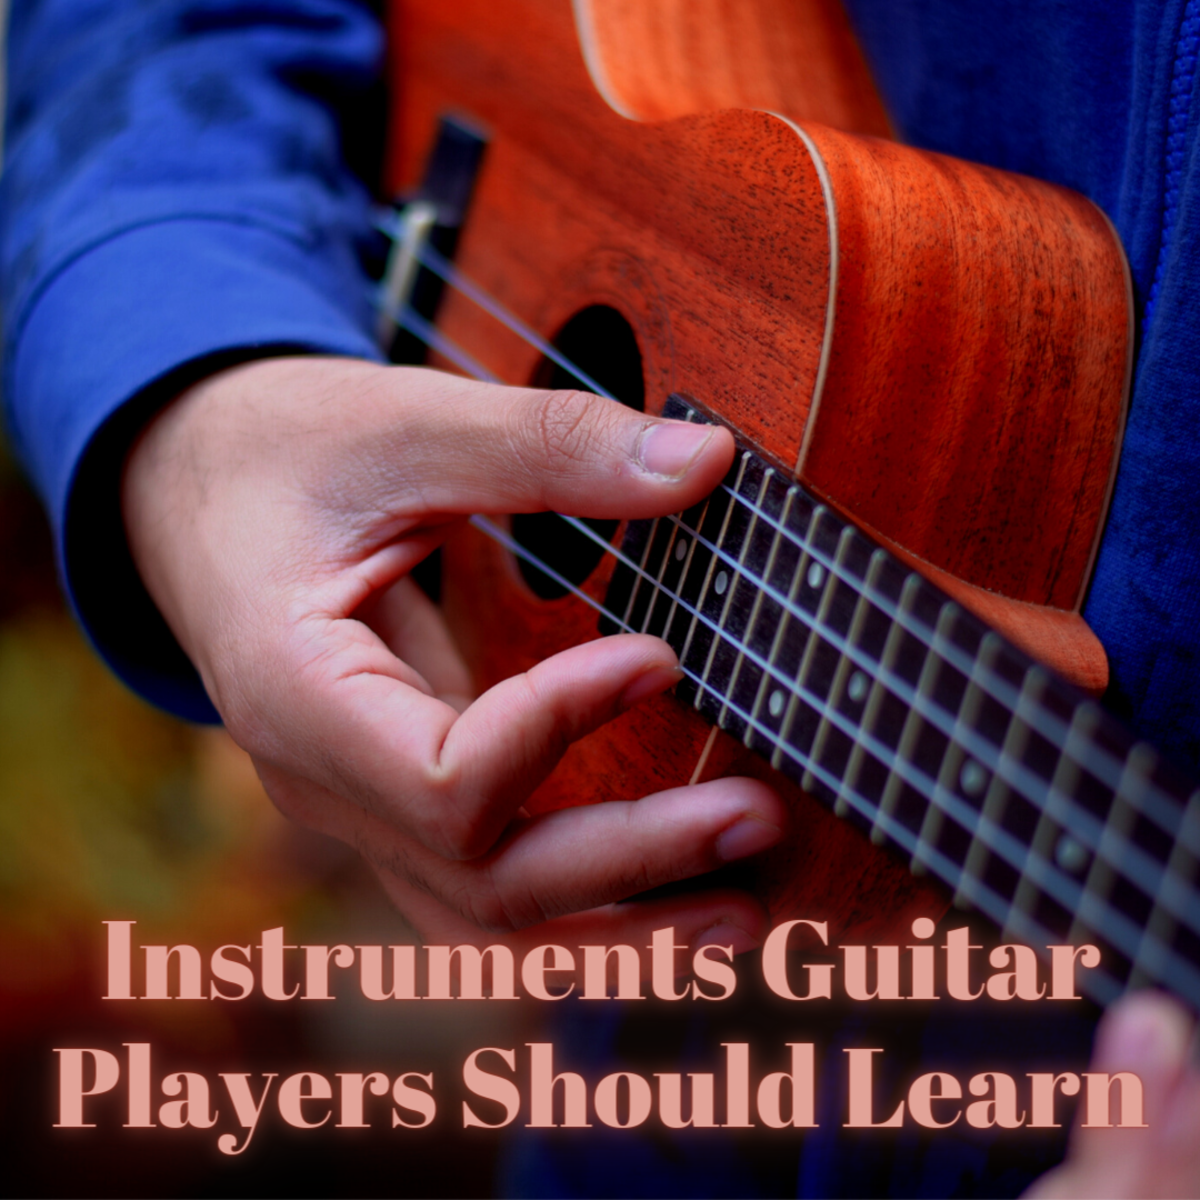 The Five Best Instruments for Guitar Players to Learn